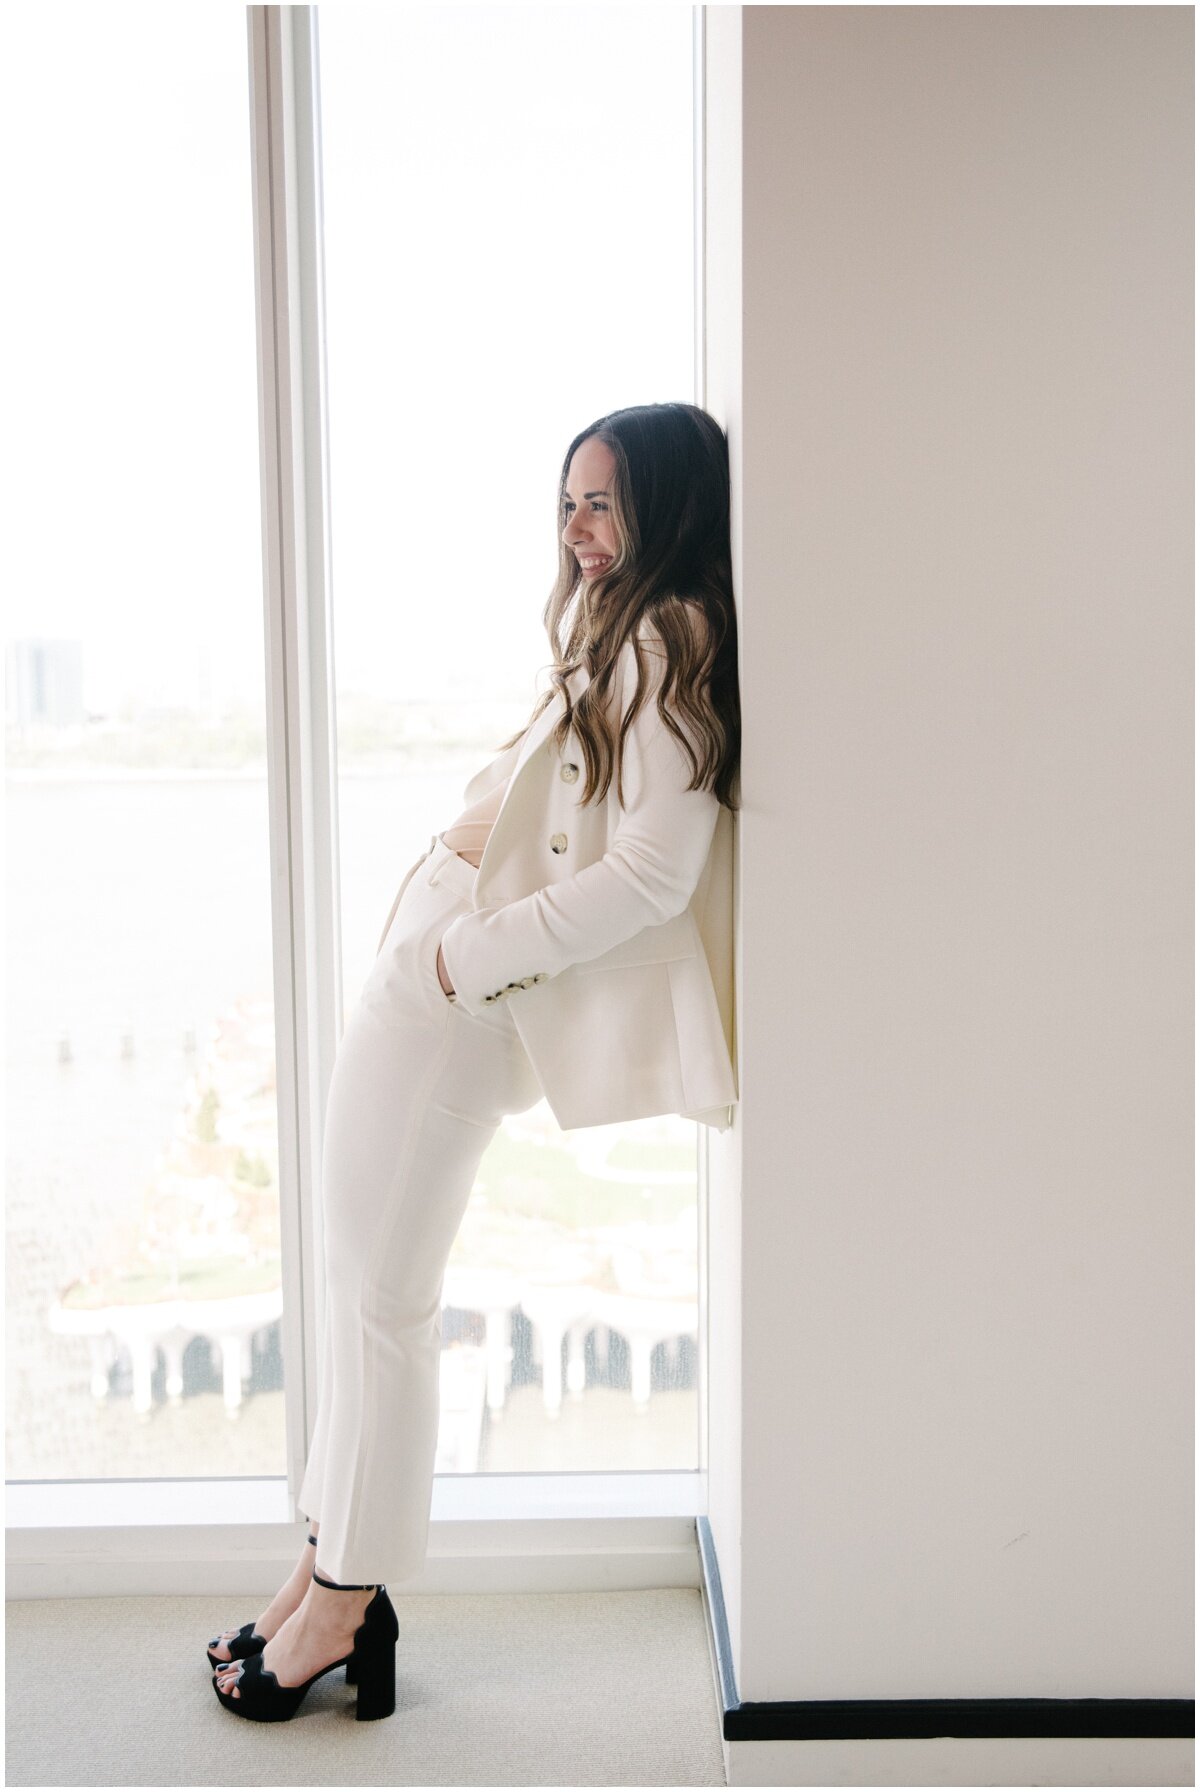  Fun brand shoot pose, woman in white in front of window, leaning on wall 